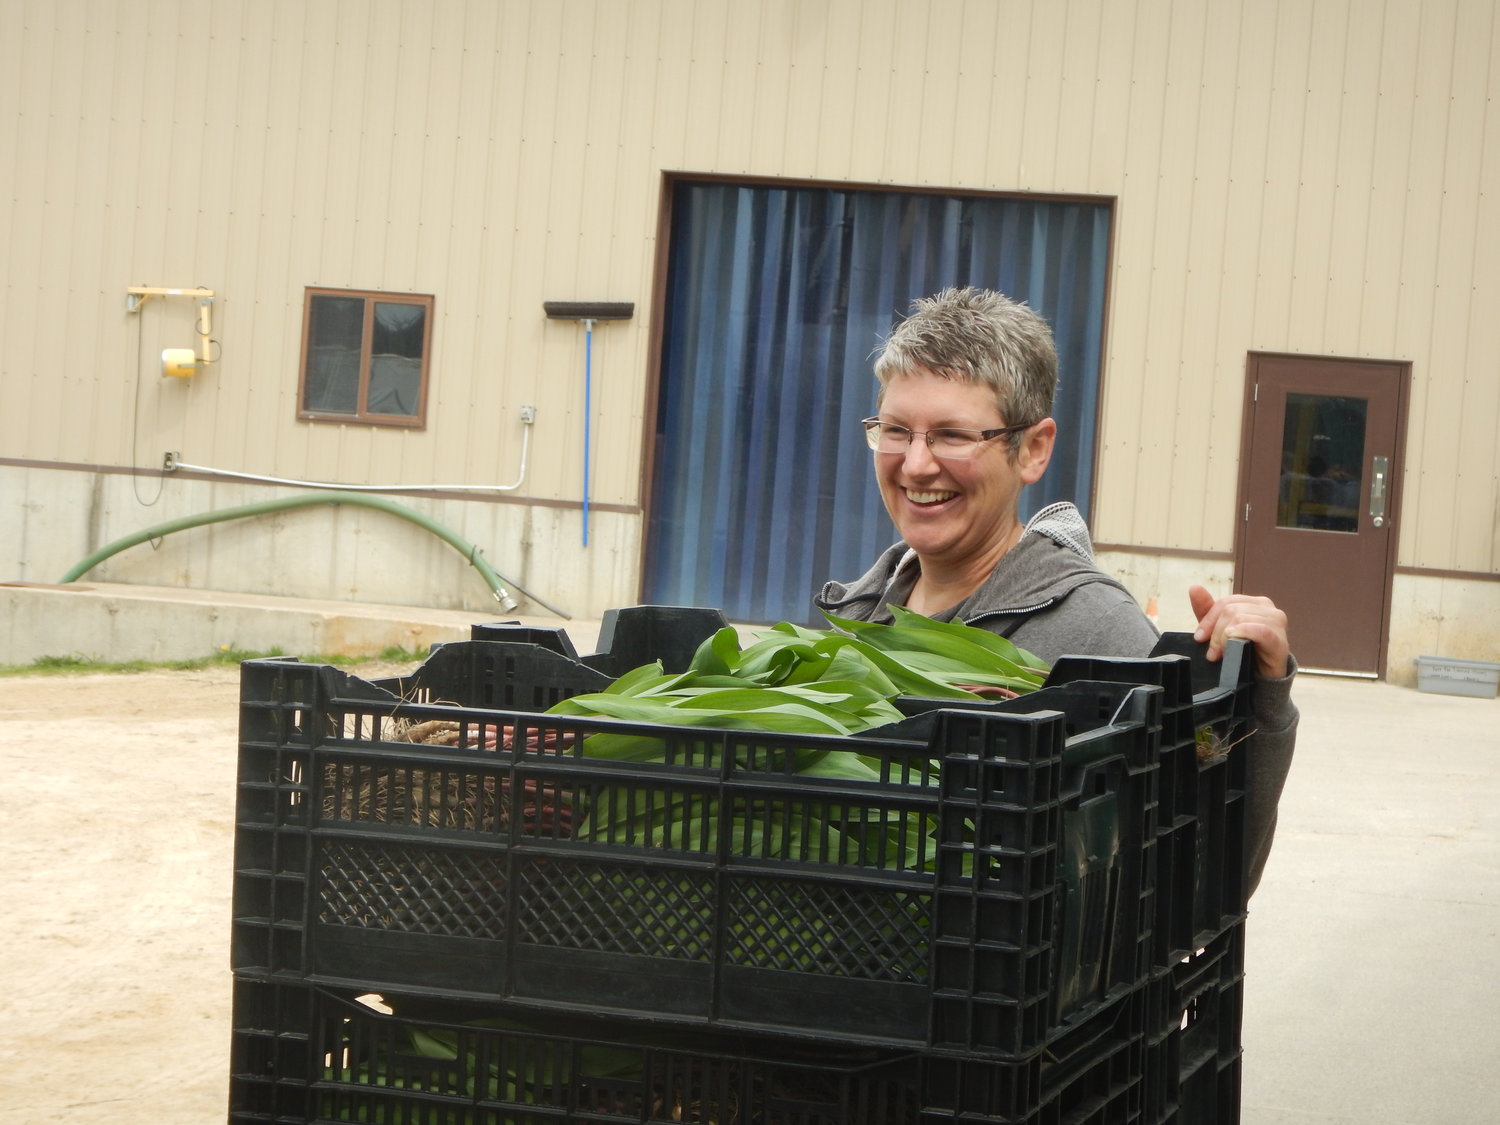 “While CSA stands for ‘Community Supported Agriculture,’ it could also stand for ‘Community Sustained Agriculture,’” observed Andrea Yoder of Harmony Valley Farm. She holds a bucket of ramps.